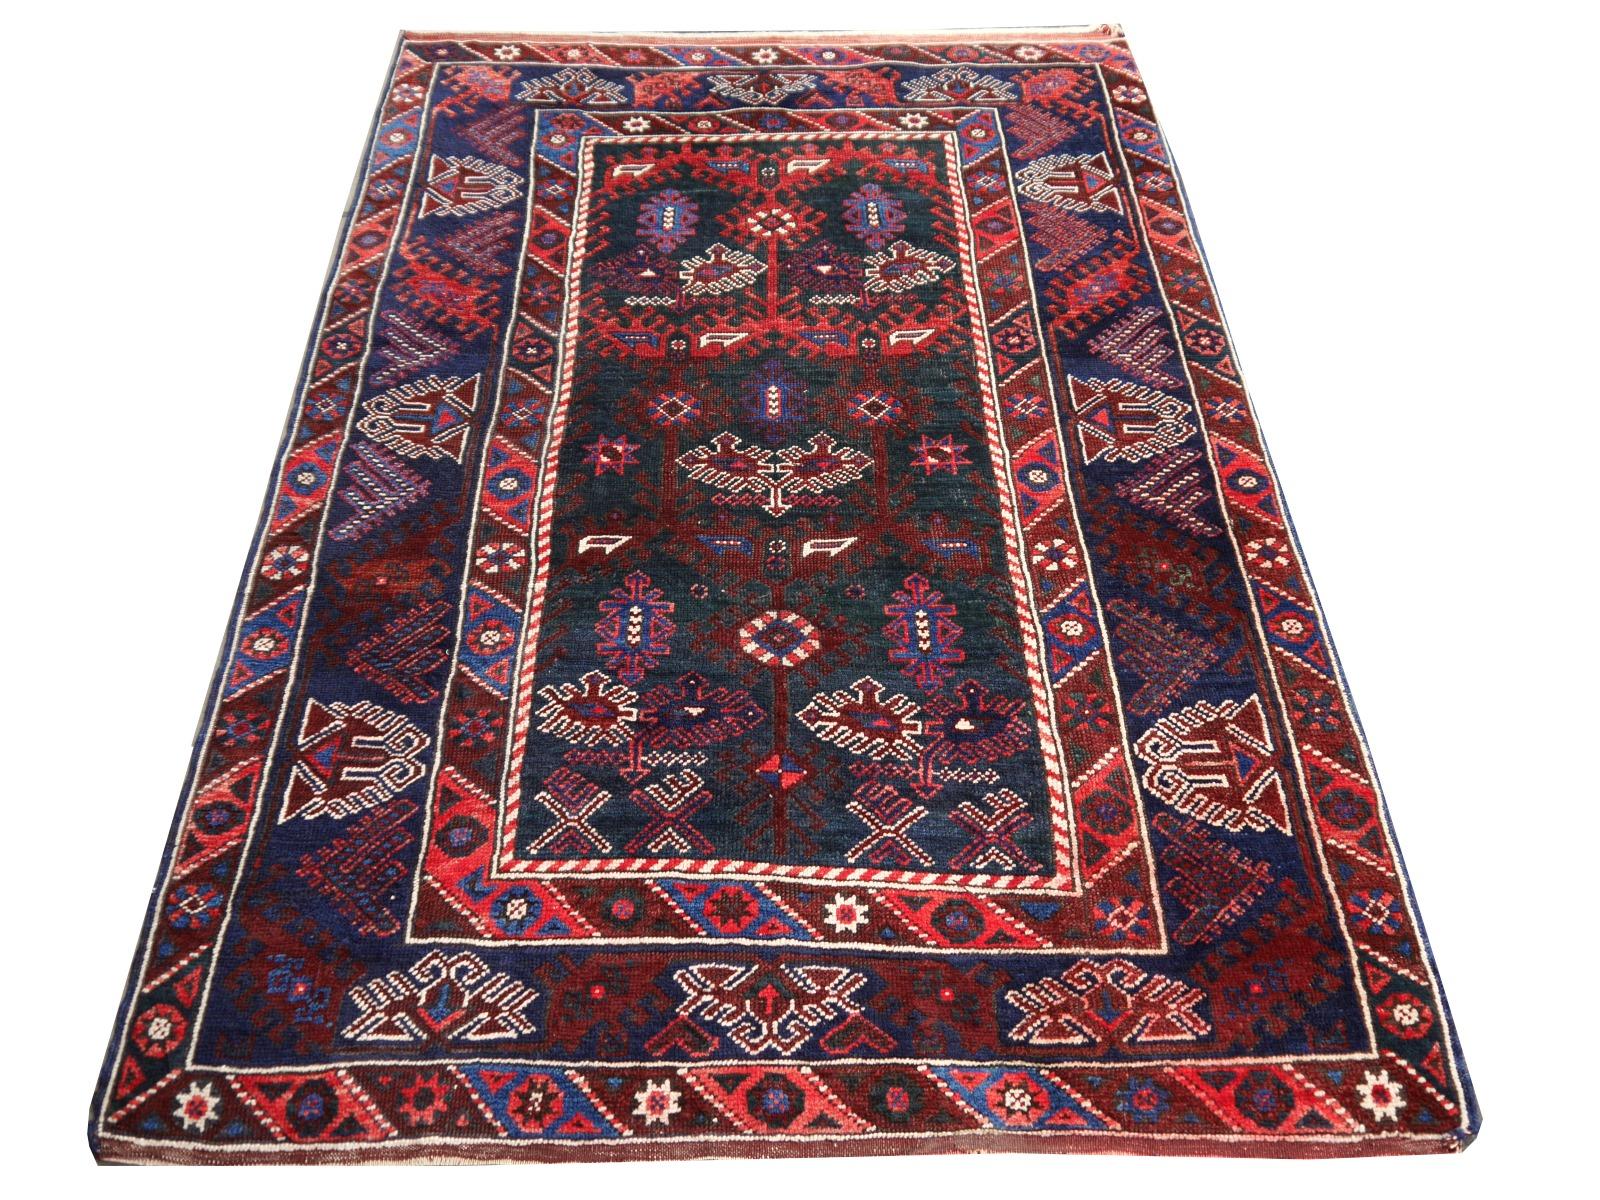 Vintage semi antique oriental accent rug, carpet or mat.

Vintage Turkish rug excellent condition, rare colors. This rug was hand-knotted in the village of Dosemealti, It has an unusual green field with blue and red traditional motives. The fringes